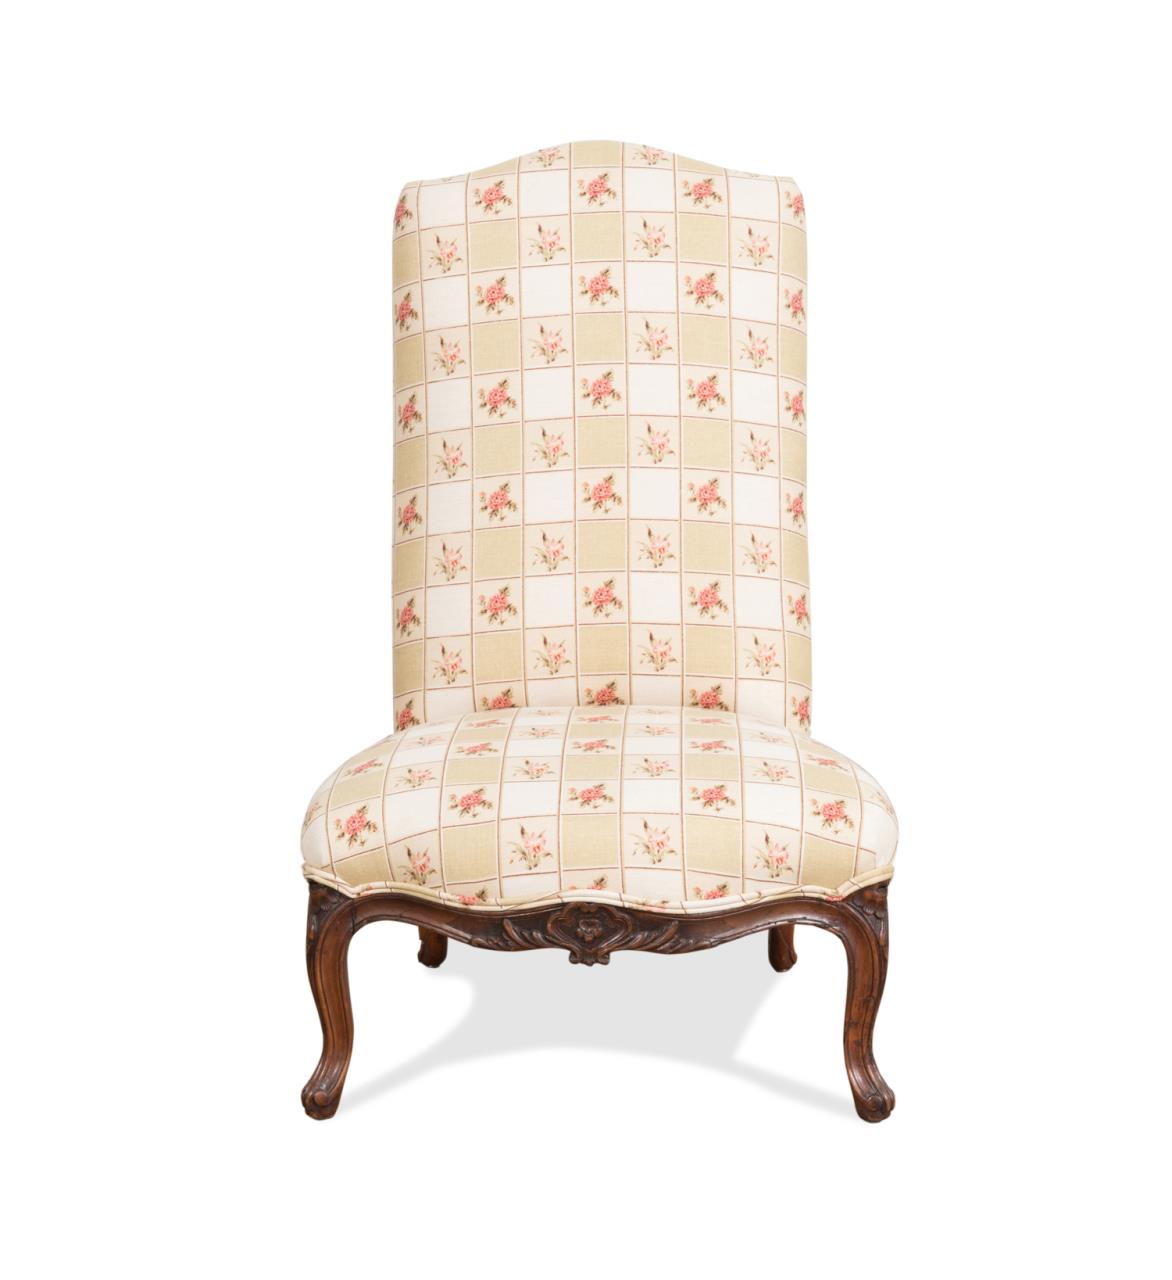 LOUIS XV STYLE UPHOLSTERED LOW